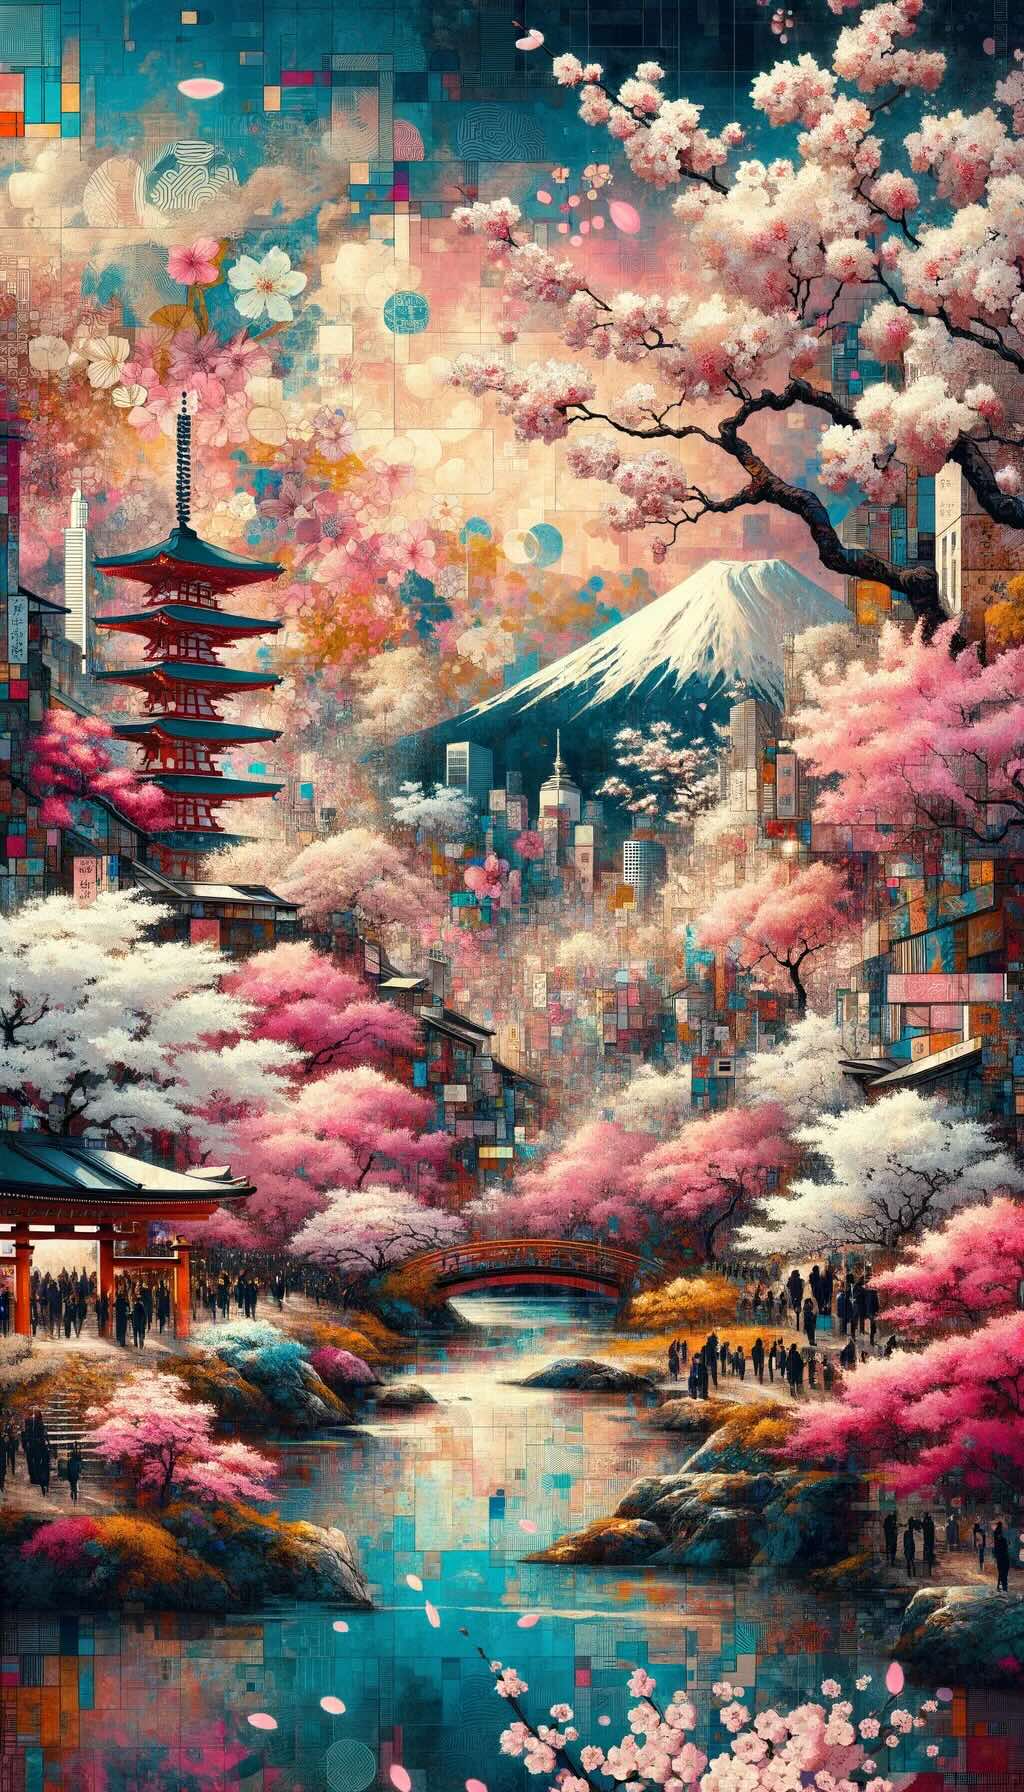 Depicting the beauty and cultural significance of cherry blossoms in Japan, capturing the dreamlike landscapes and the essence of sakura season.